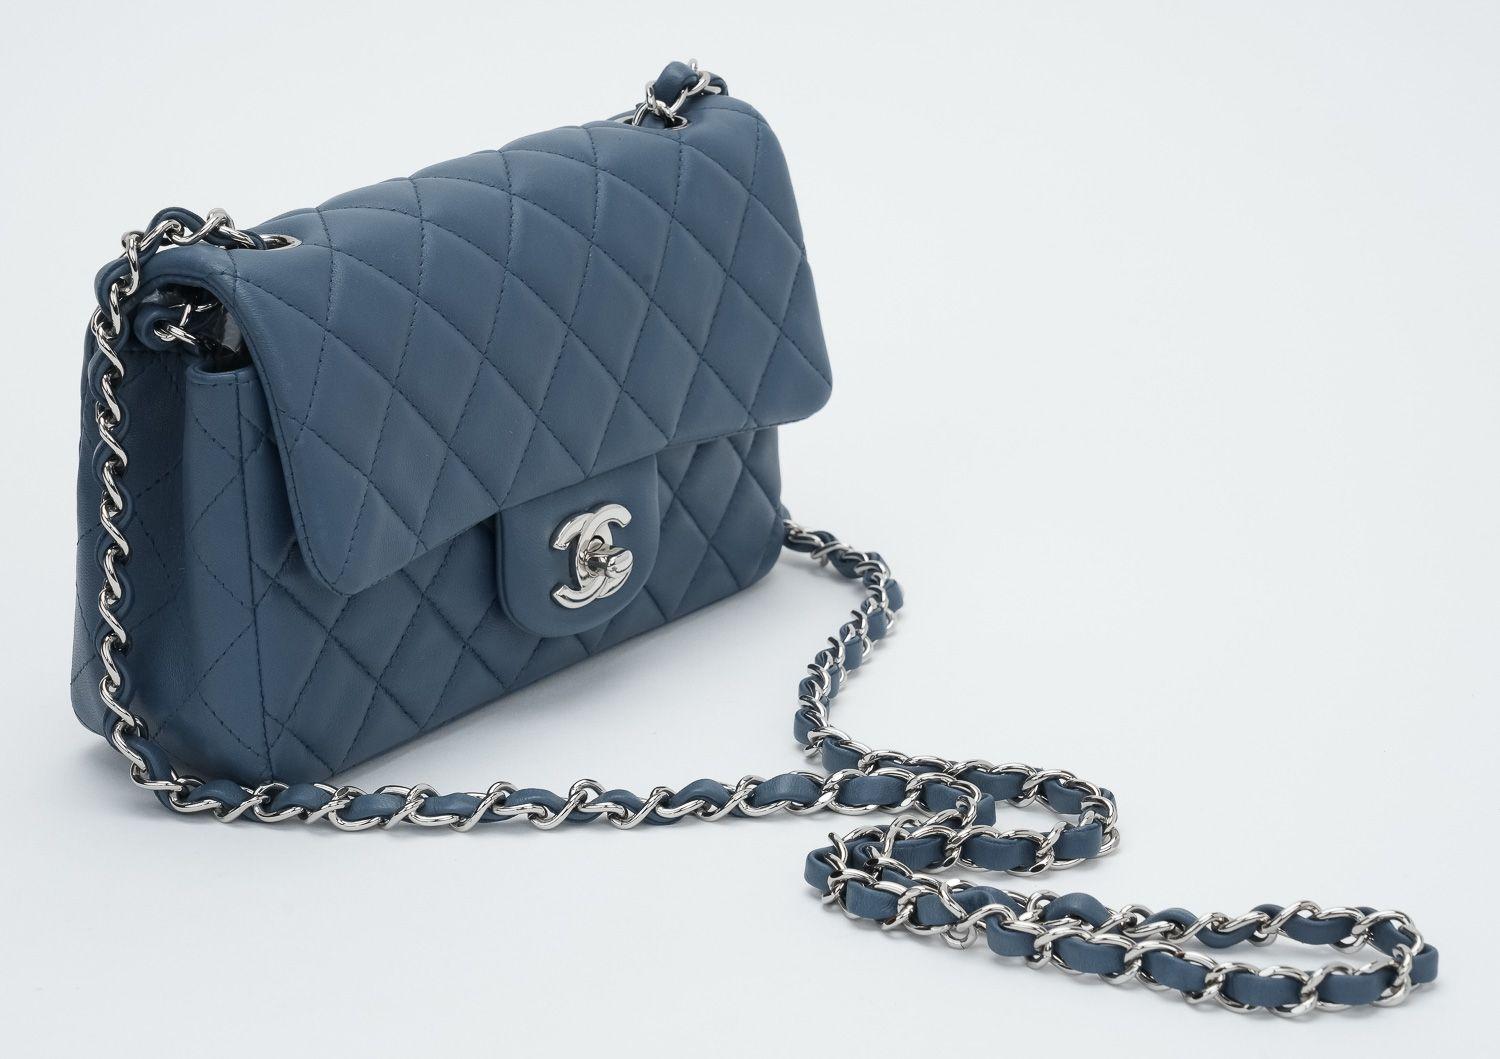 Chanel Mini Rectangular Classic flap bag. Crafted in luxurious Blue Jeans Lambskin leather with silver hardware. Cross body chain. Collection 16. Excellent condition. The bag shows the hologram and comes with the id card and original dust cover .